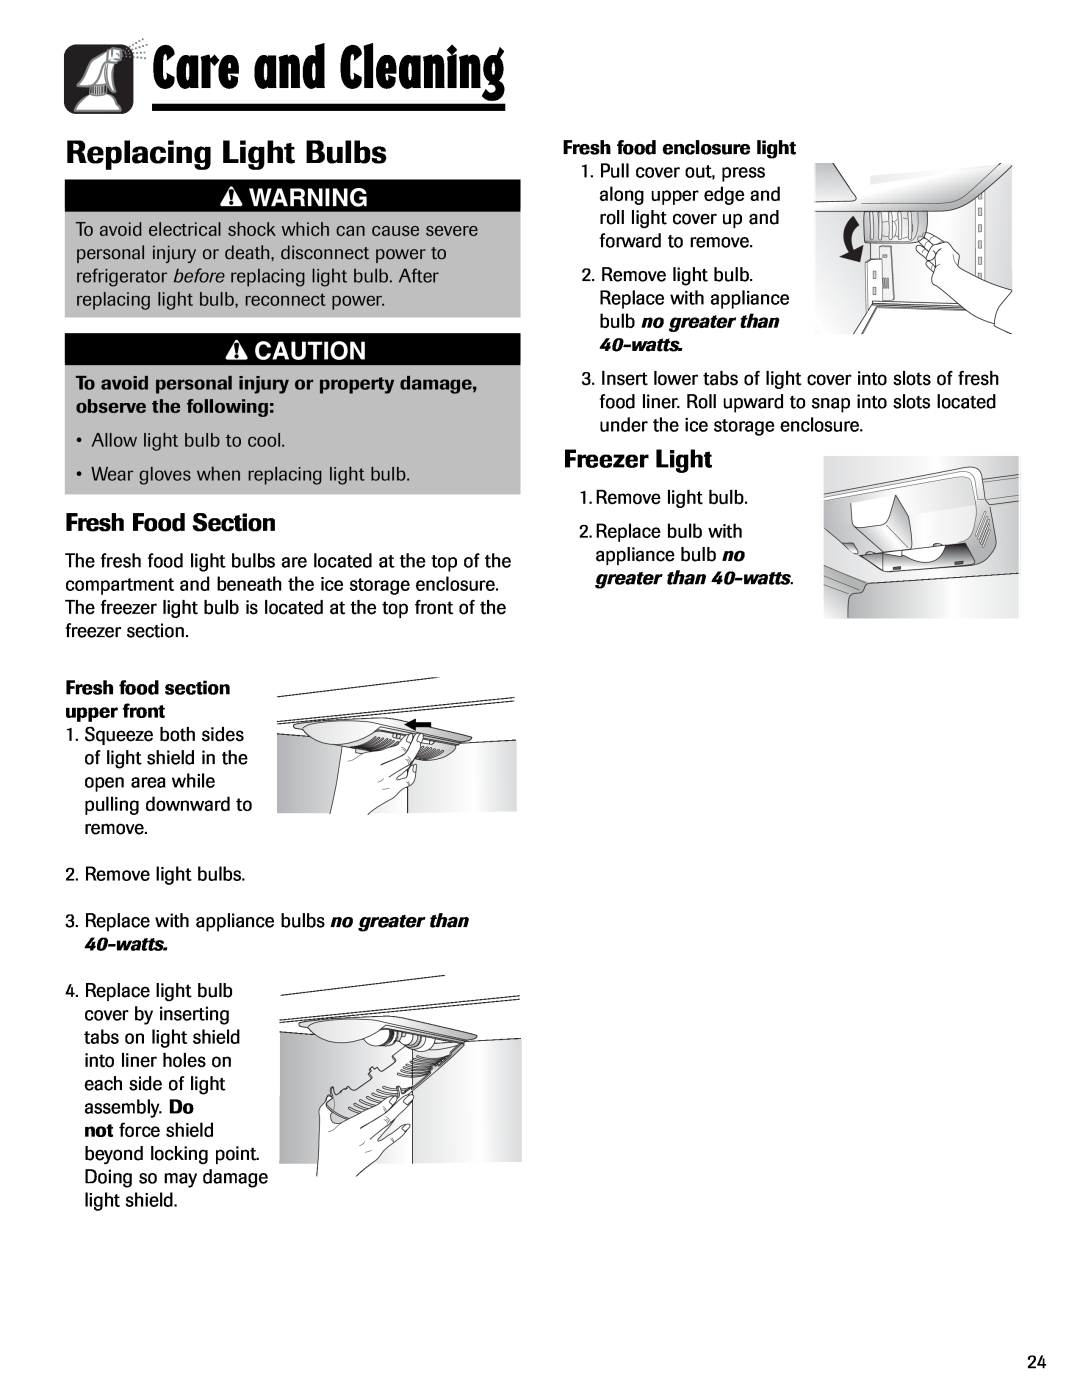 Amana AFI2538AEW important safety instructions Replacing Light Bulbs, Fresh Food Section, Freezer Light, Care and Cleaning 